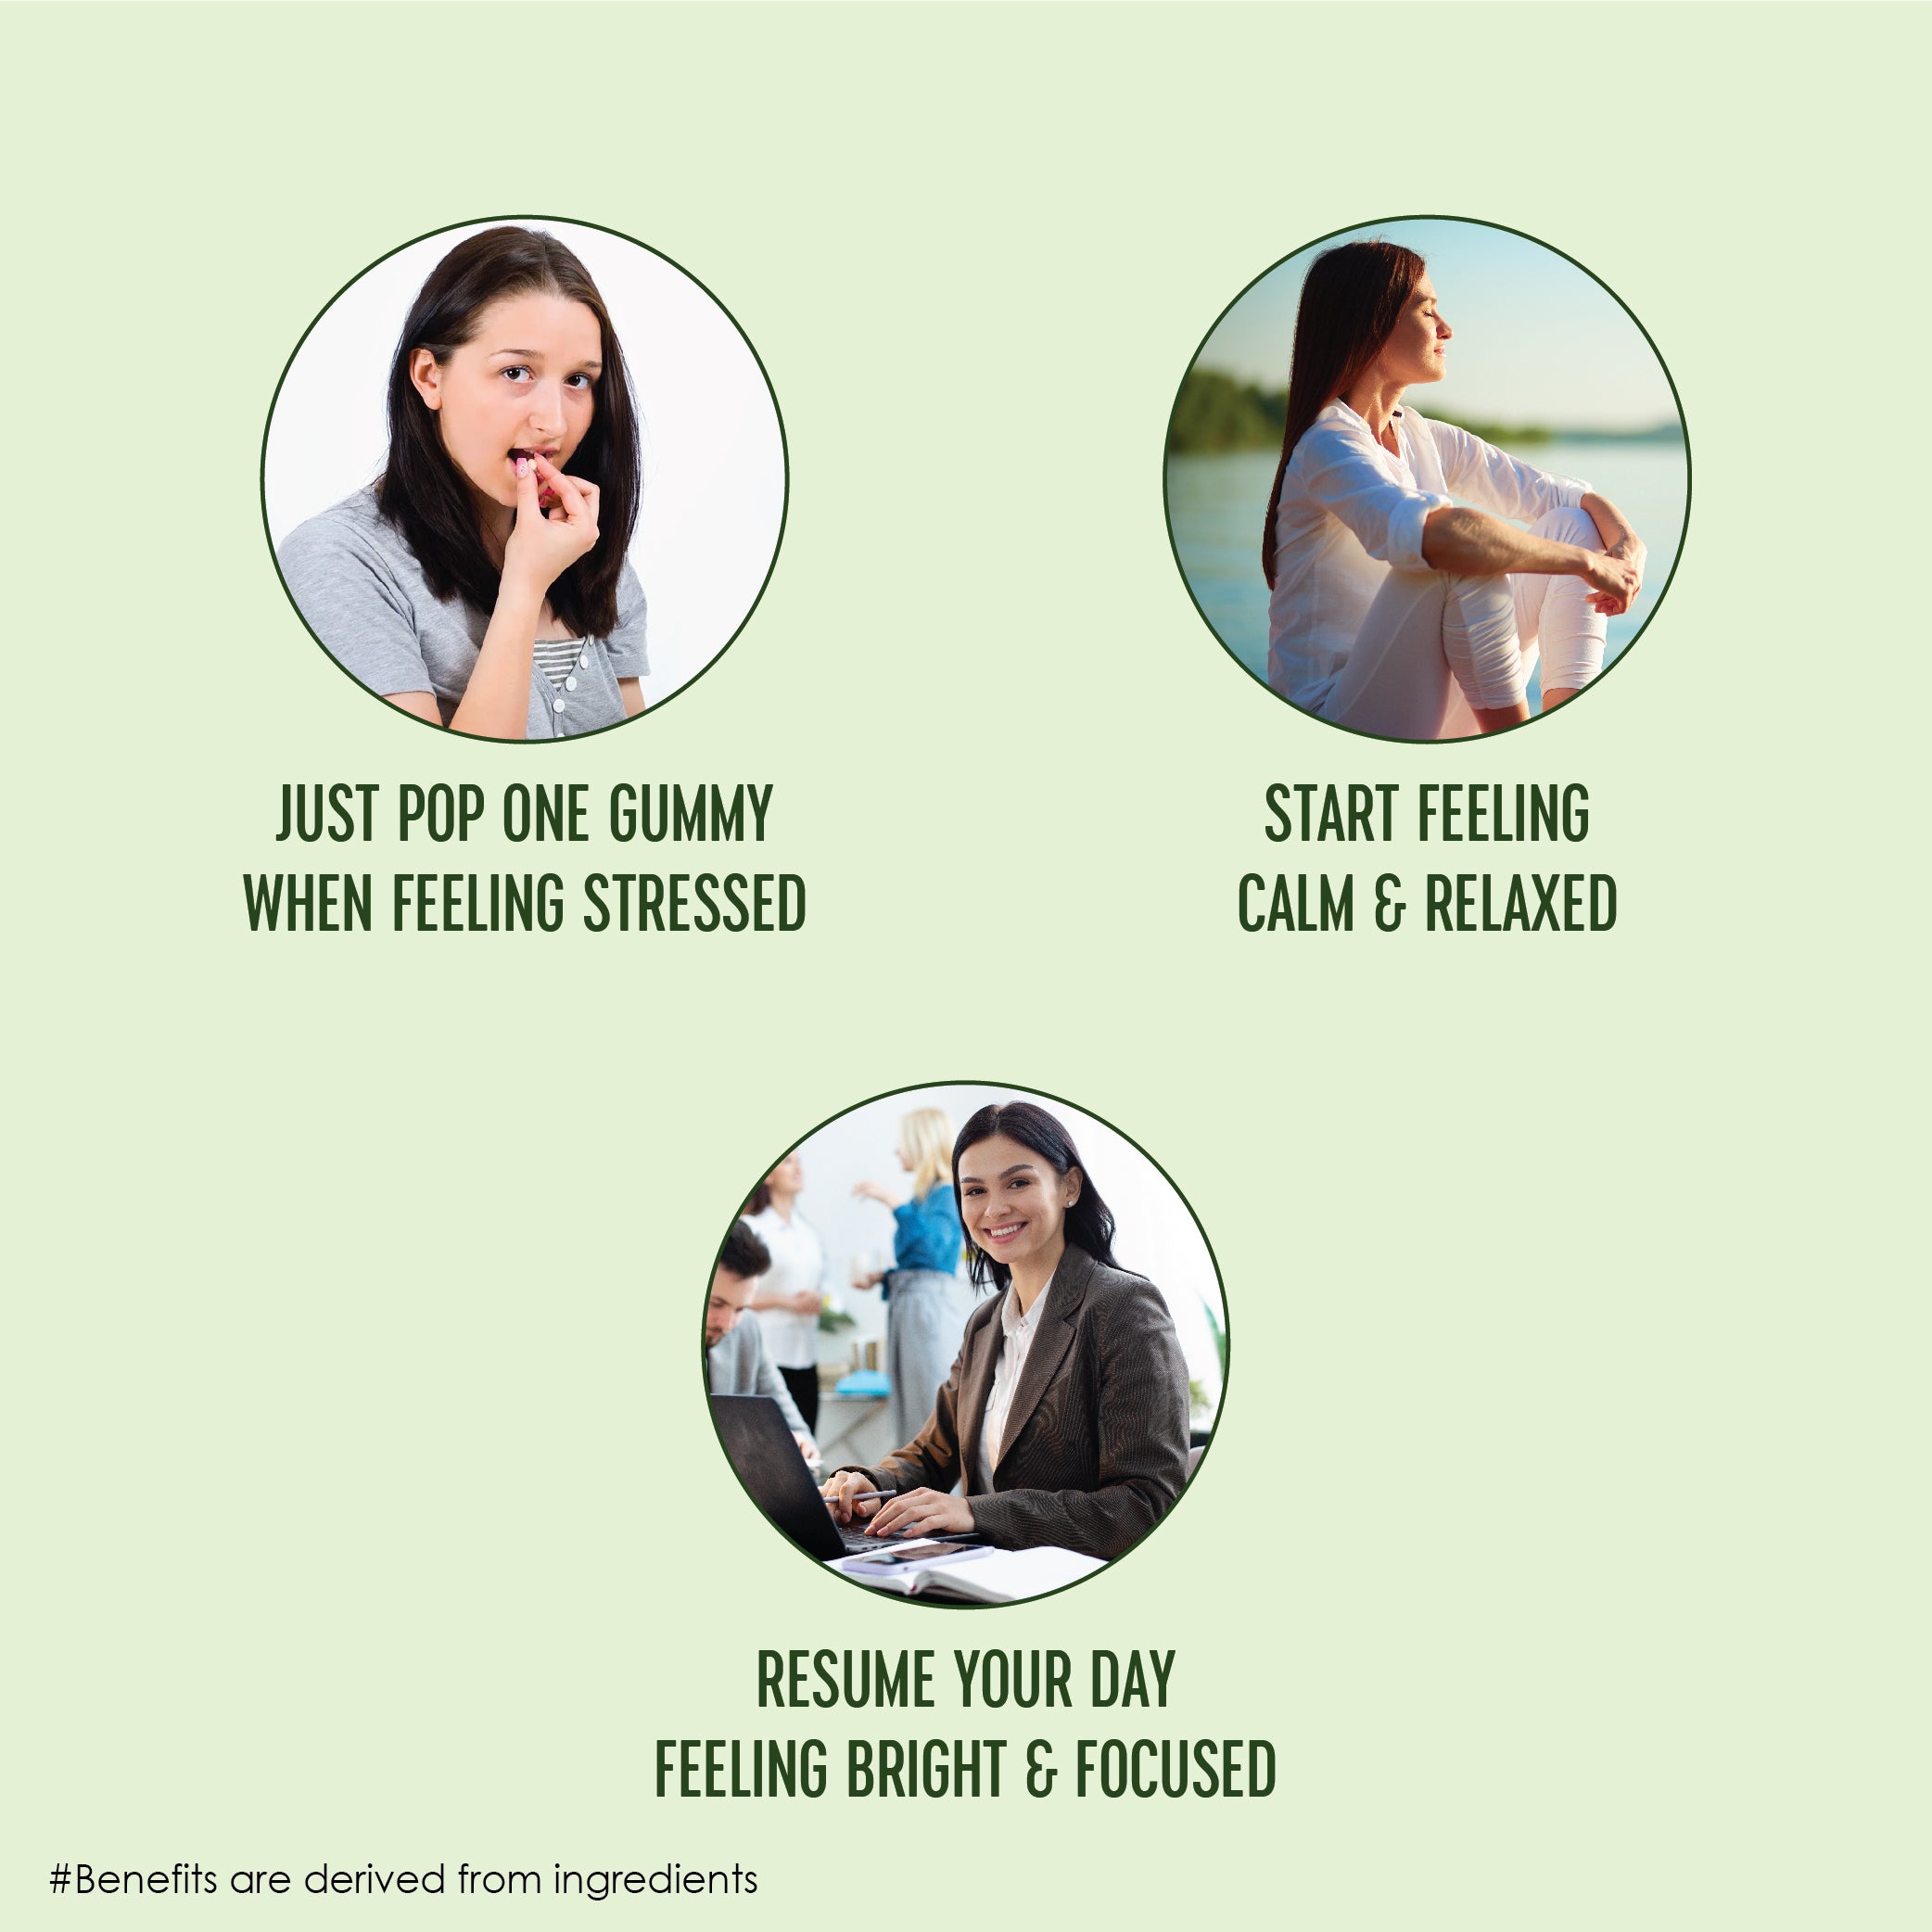 Buy Stress Relief Tablets in India, Buy Stress Relief Tablets, Stress Relief Tablets in India, Stress Relief Tablets, Anxiety Relief Tablets, SilverEdge